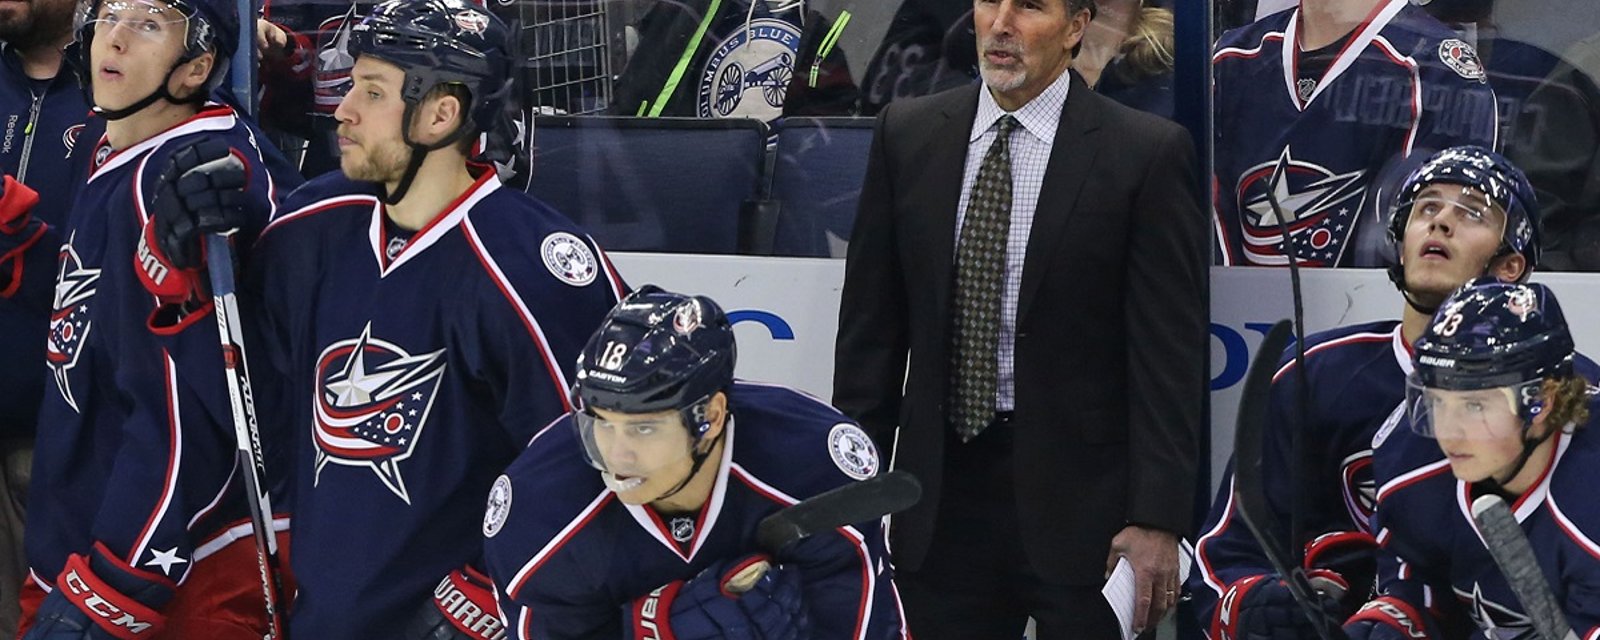 Tortorella responds as only he can when asked about players who won't stand for the anthem.